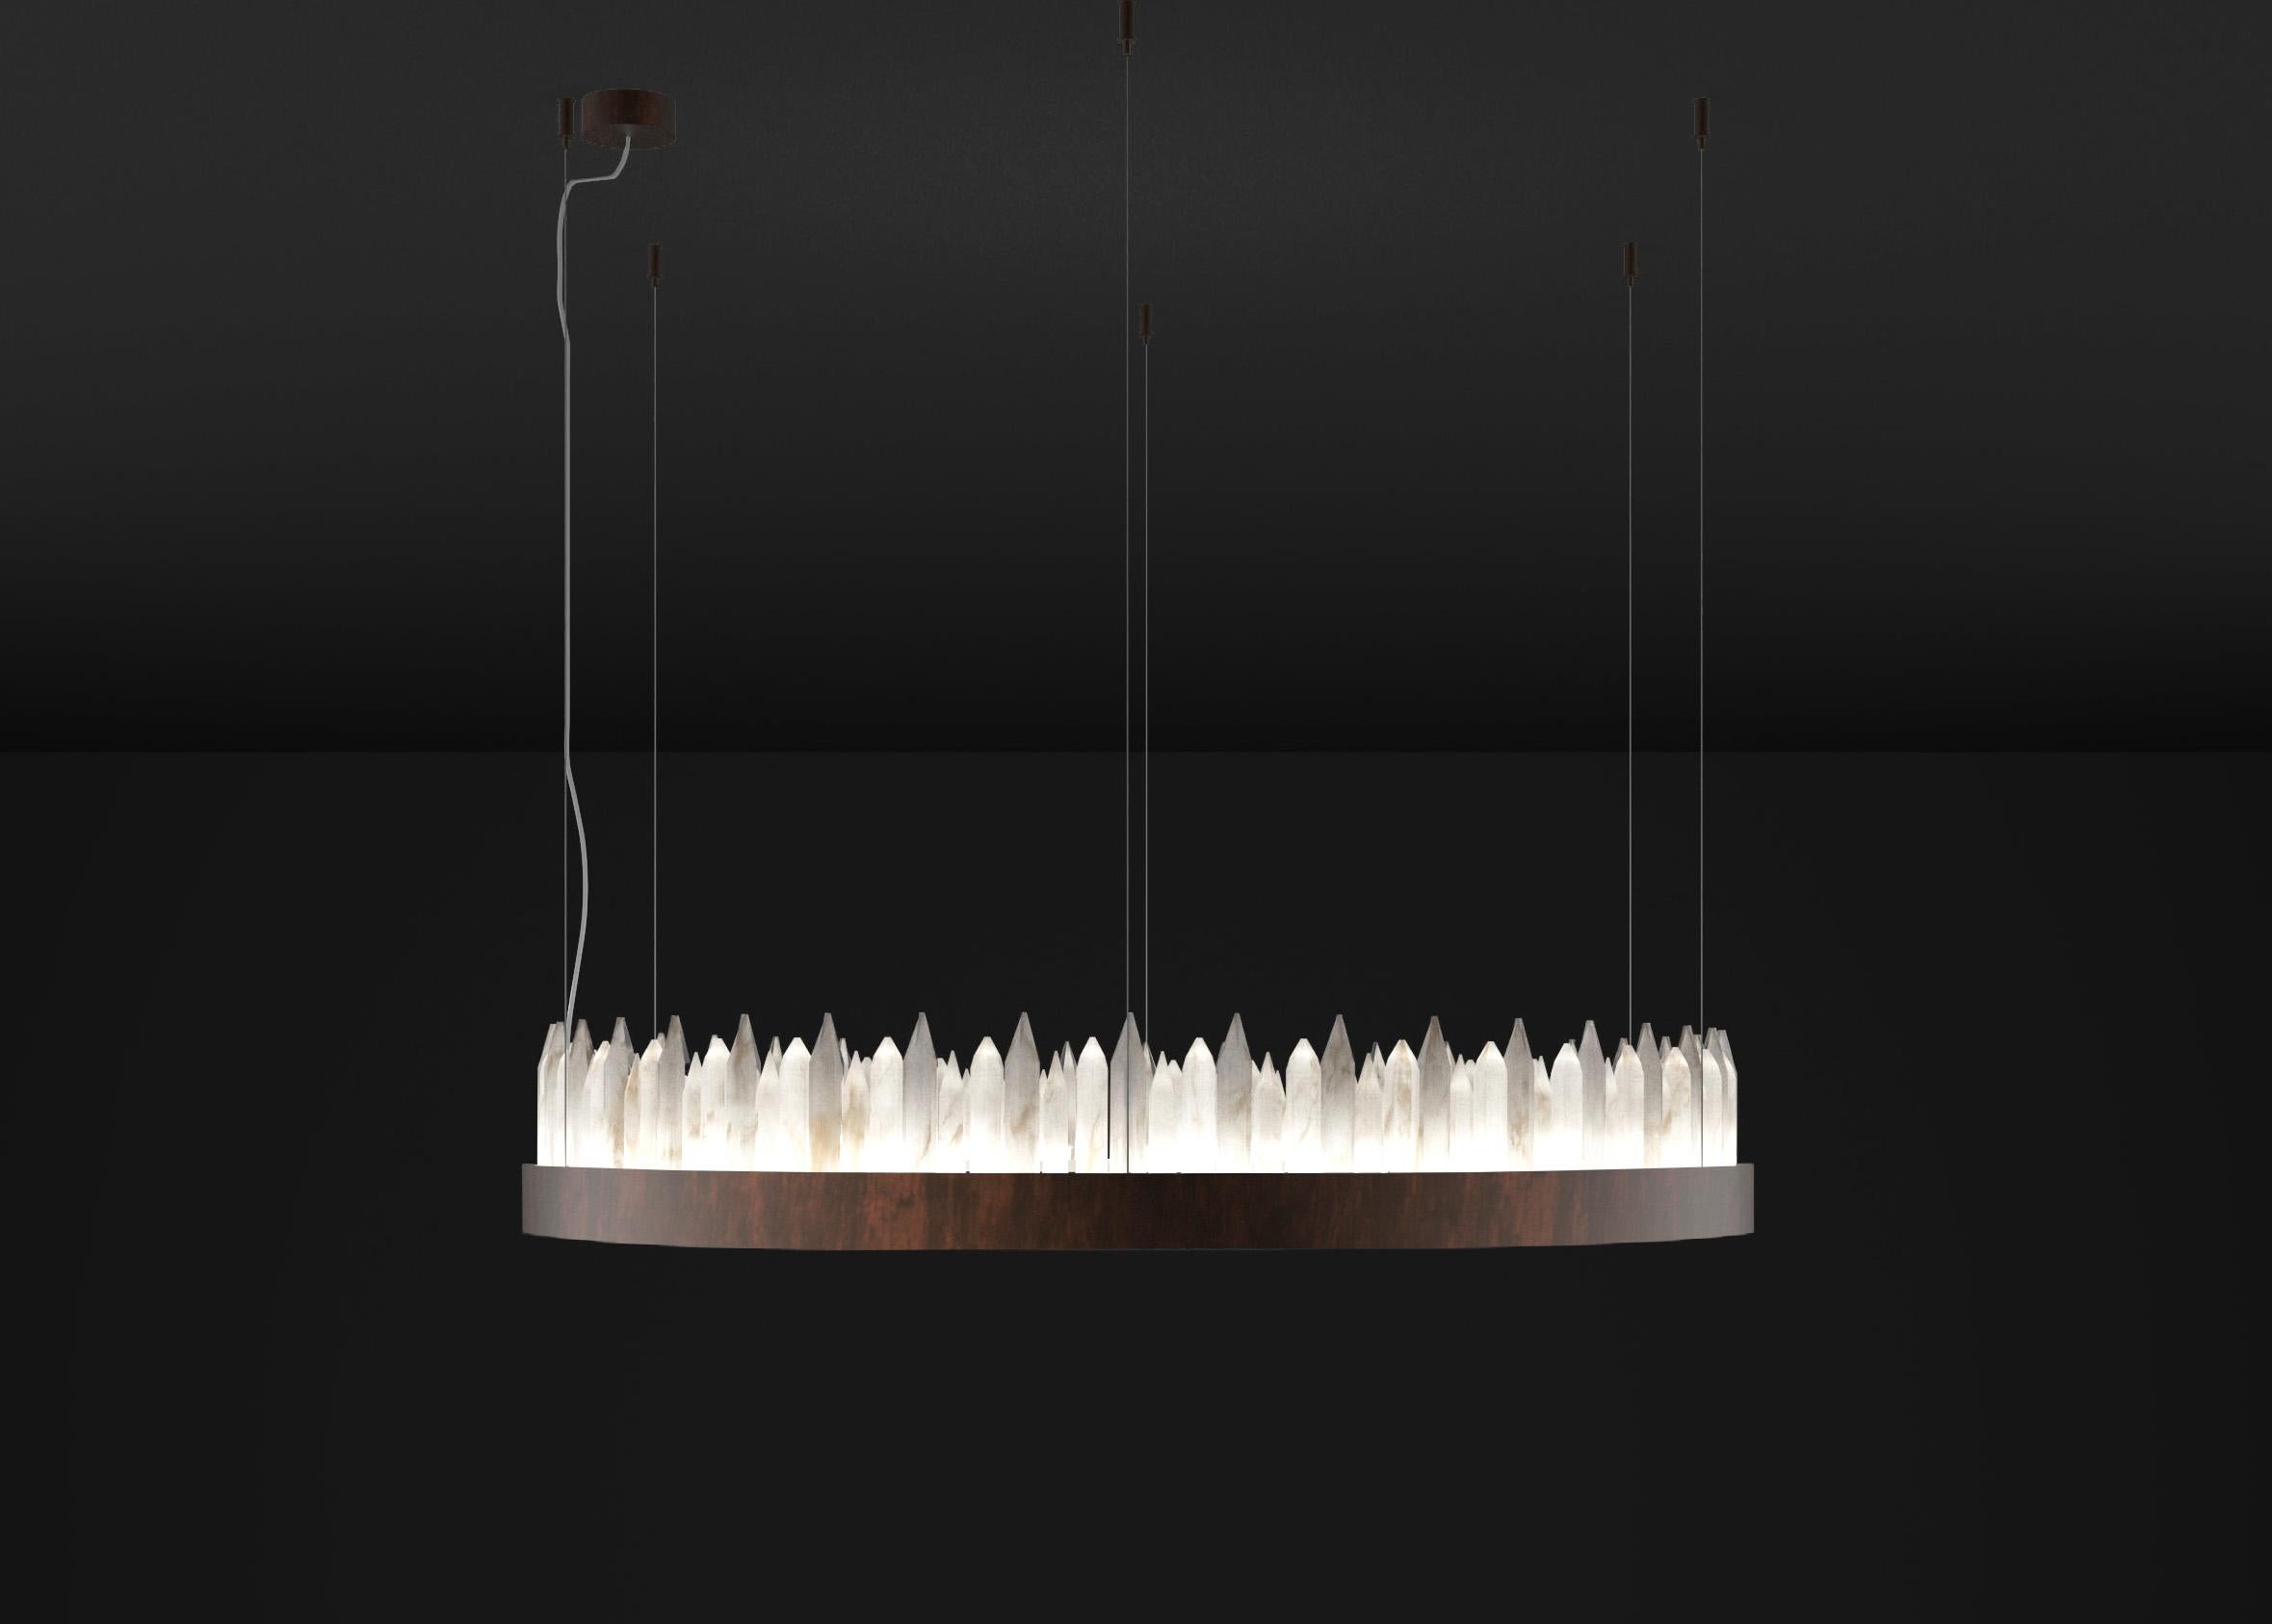 Urano Ruggine of Florence 100 Pendant Light 2 by Alabastro Italiano
Dimensions: Ø 100 x H 20 cm.
Materials: Glass and Ruggine of Florence metal.

Available in different sizes: Ø 60, Ø 80, Ø 100 and Ø 120 cm. 
Available in different finishes: Shiny